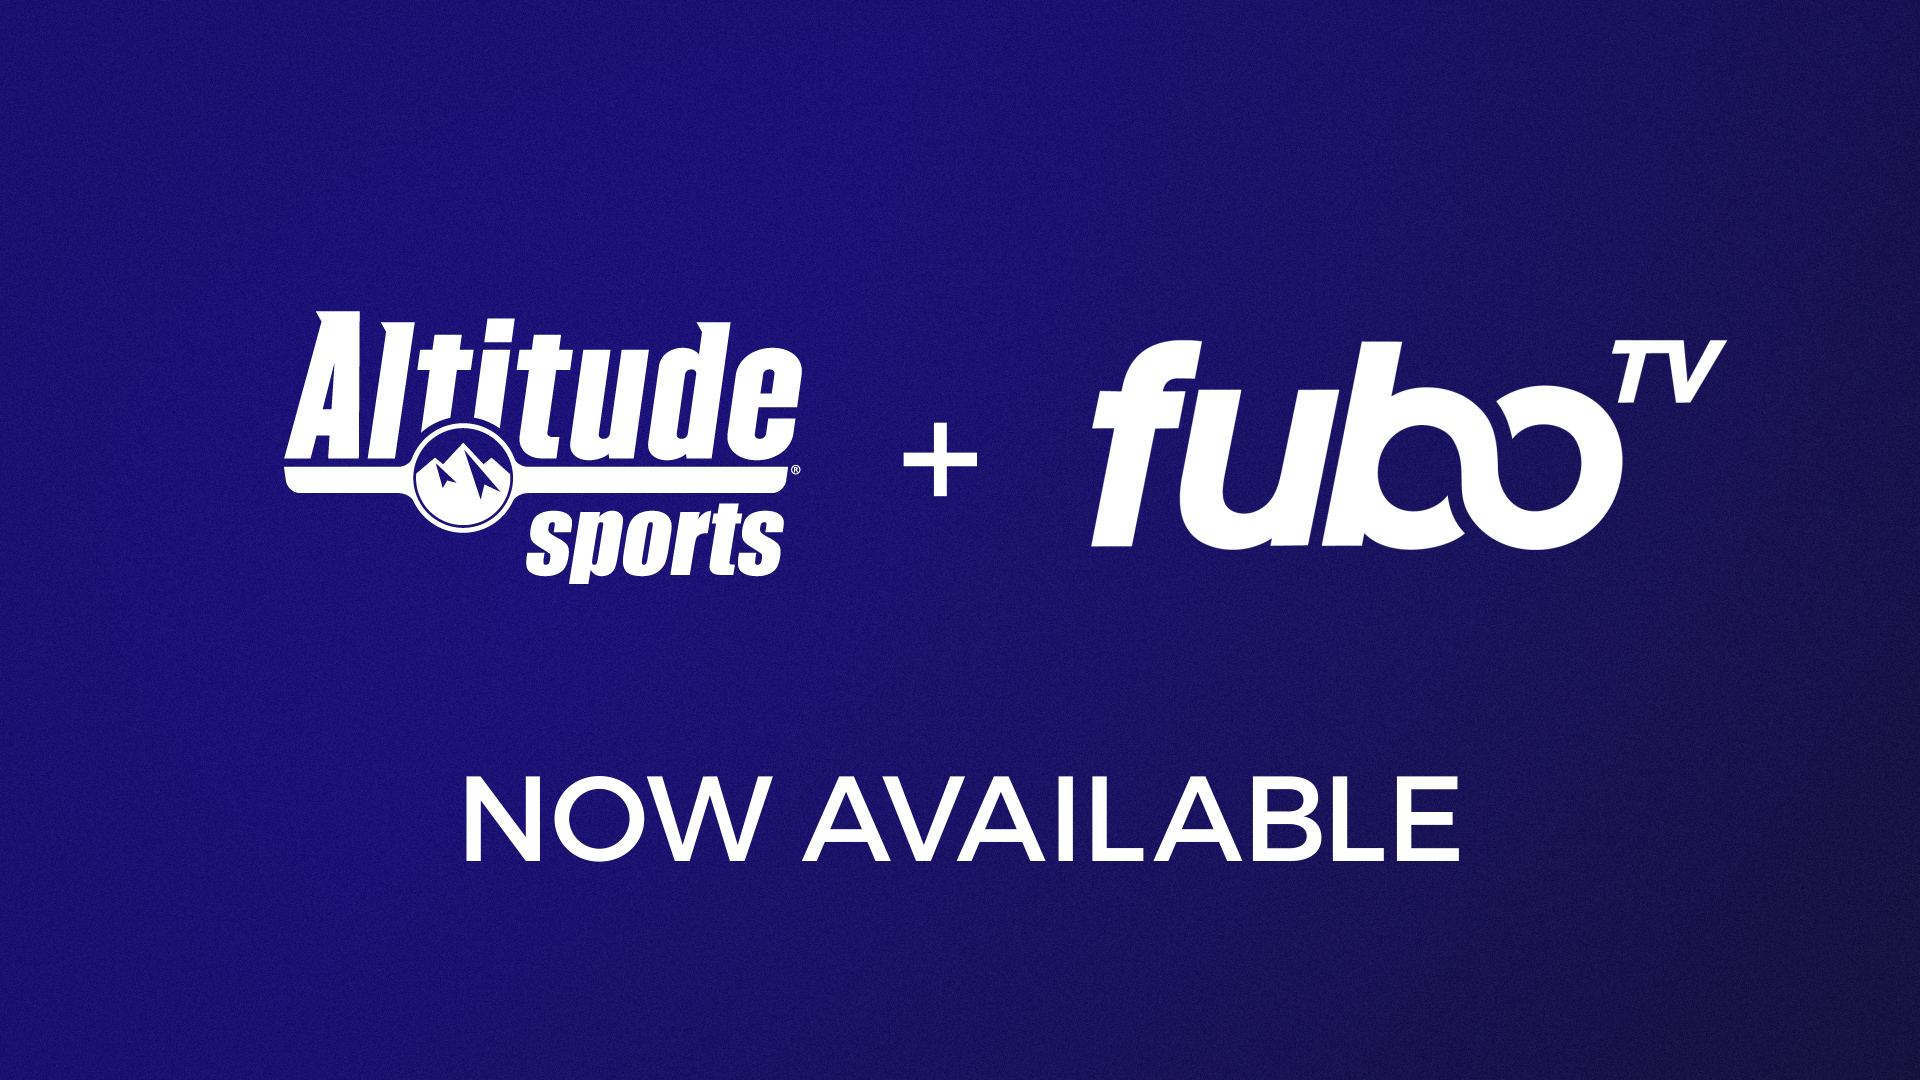 FUBOTV, ALTITUDE SPORTS ANNOUNCE CARRIAGE AGREEMENT, NEWEST STREAMING DEAL FOR DENVER NUGGETS, COLORADO AVALANCHE COVERAGE